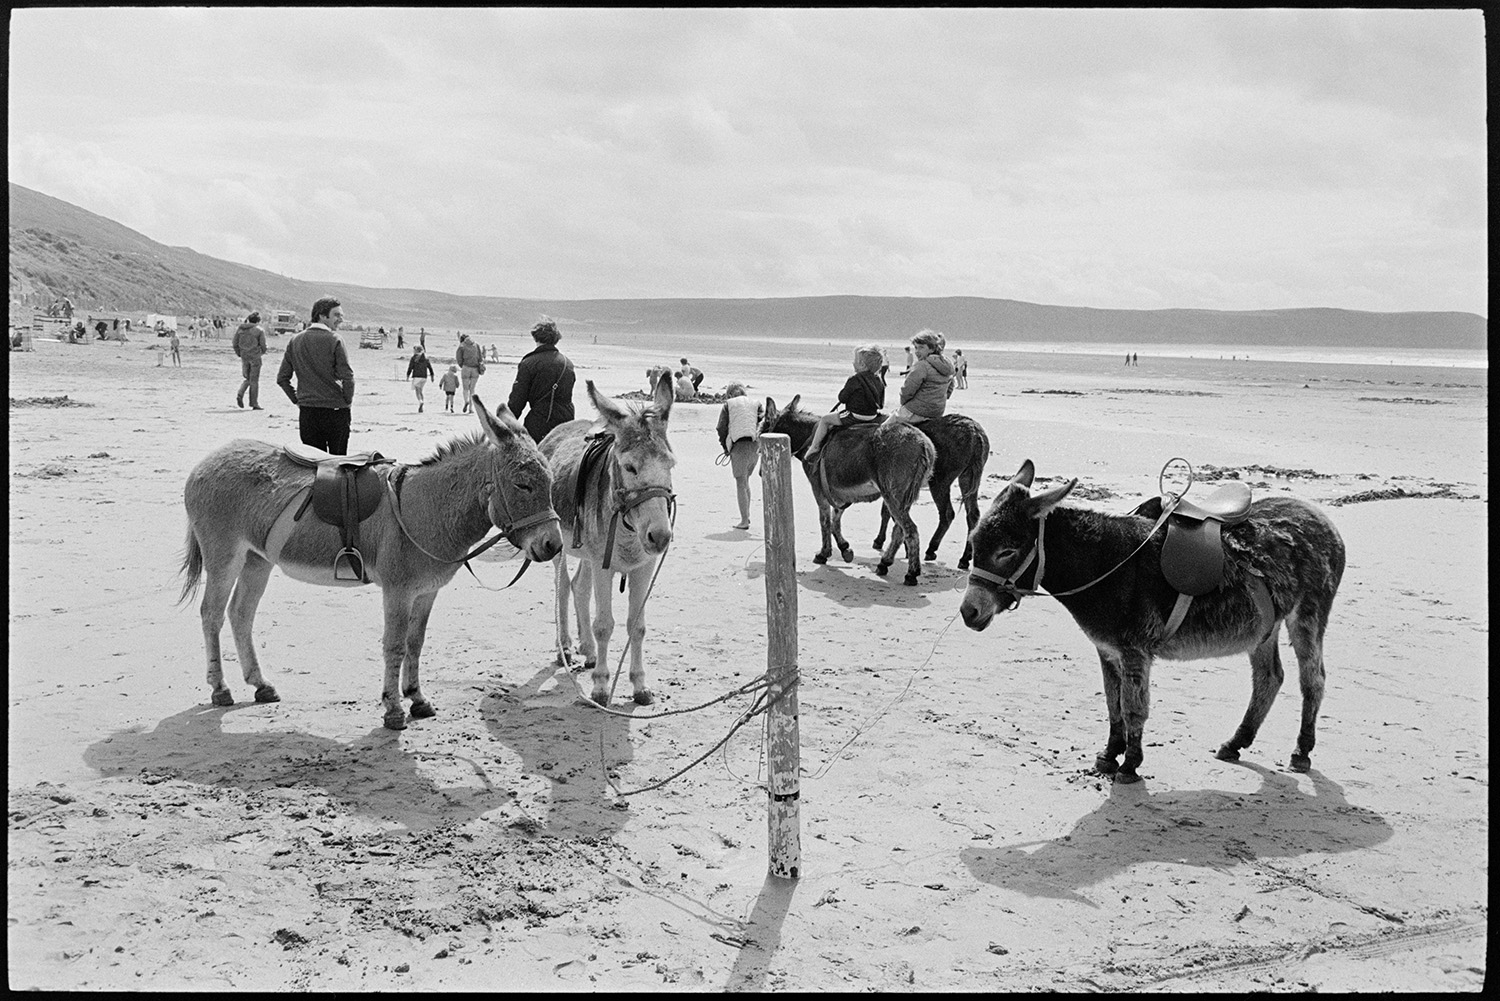 Beach scenes with donkey rides, bathing huts, people swimming.
[Three donkeys with saddles, waiting to give rides at Woolacombe beach. They are tethered to a wooden post on the beach. Two children are riding on donkeys in the background, past other holiday makers.]